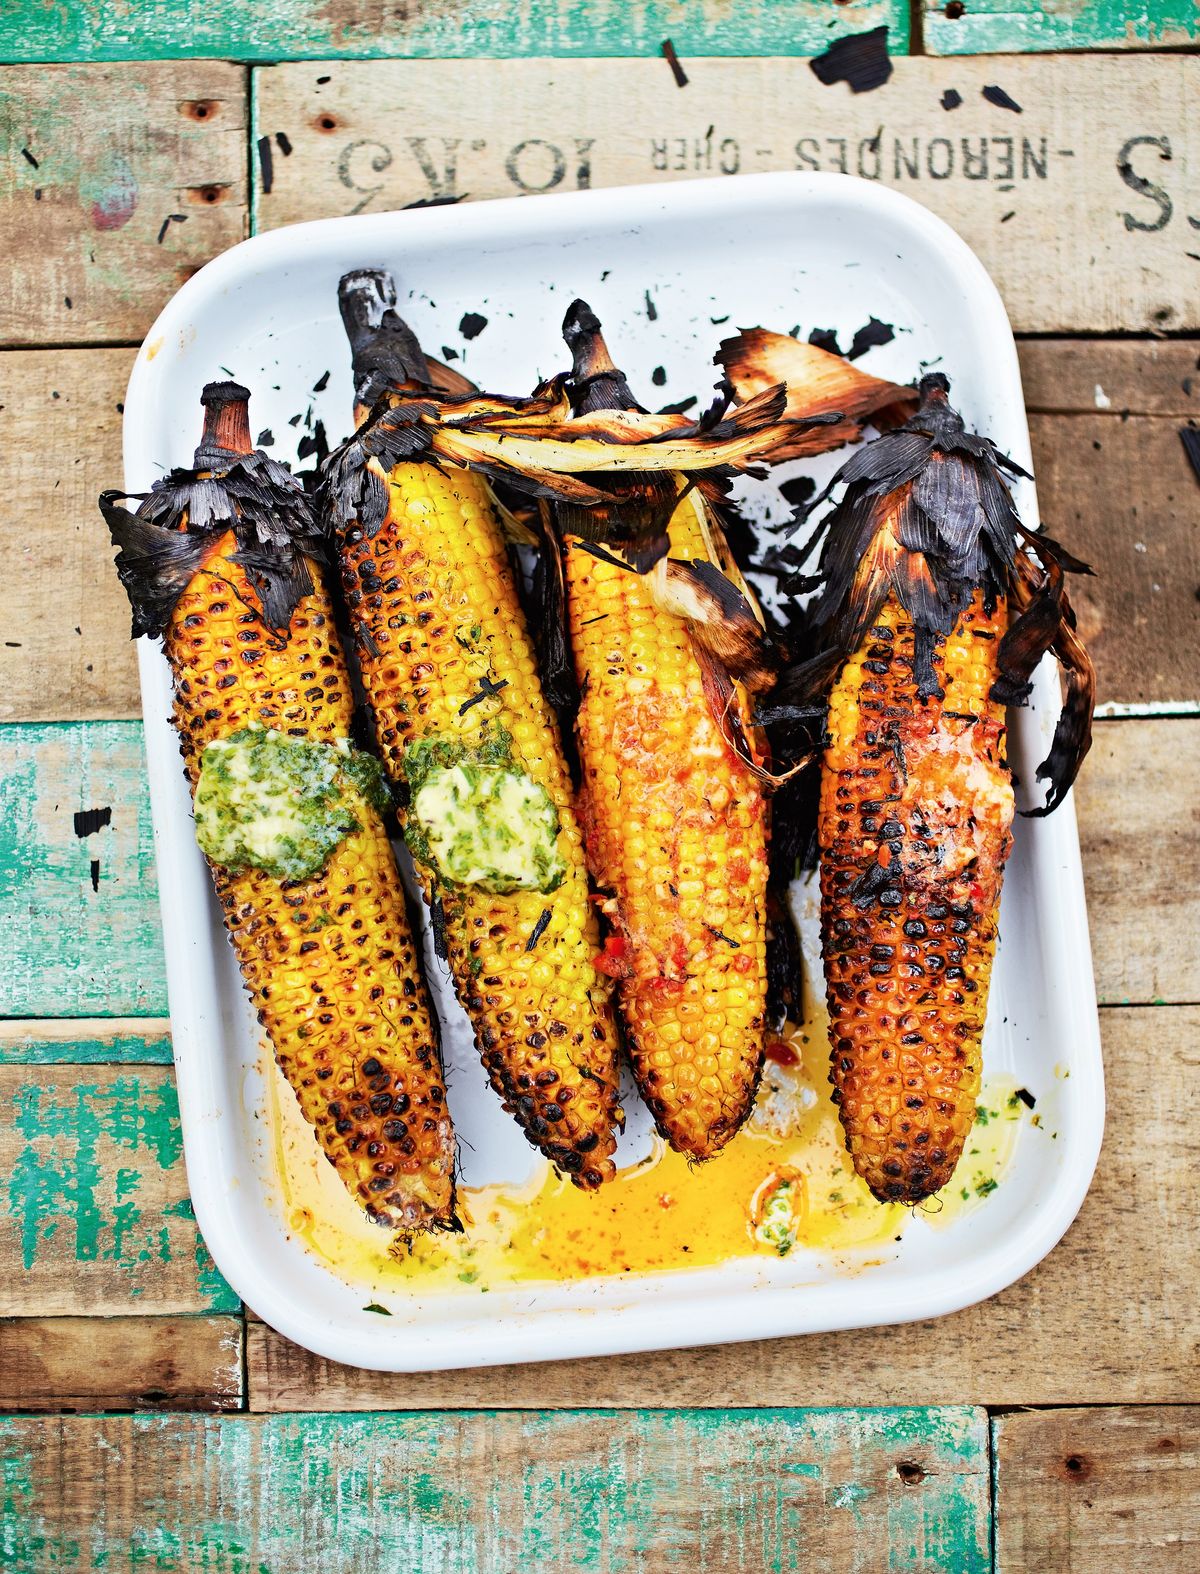 Barbecued or Griddled Sweetcorn with Flavoured Butters